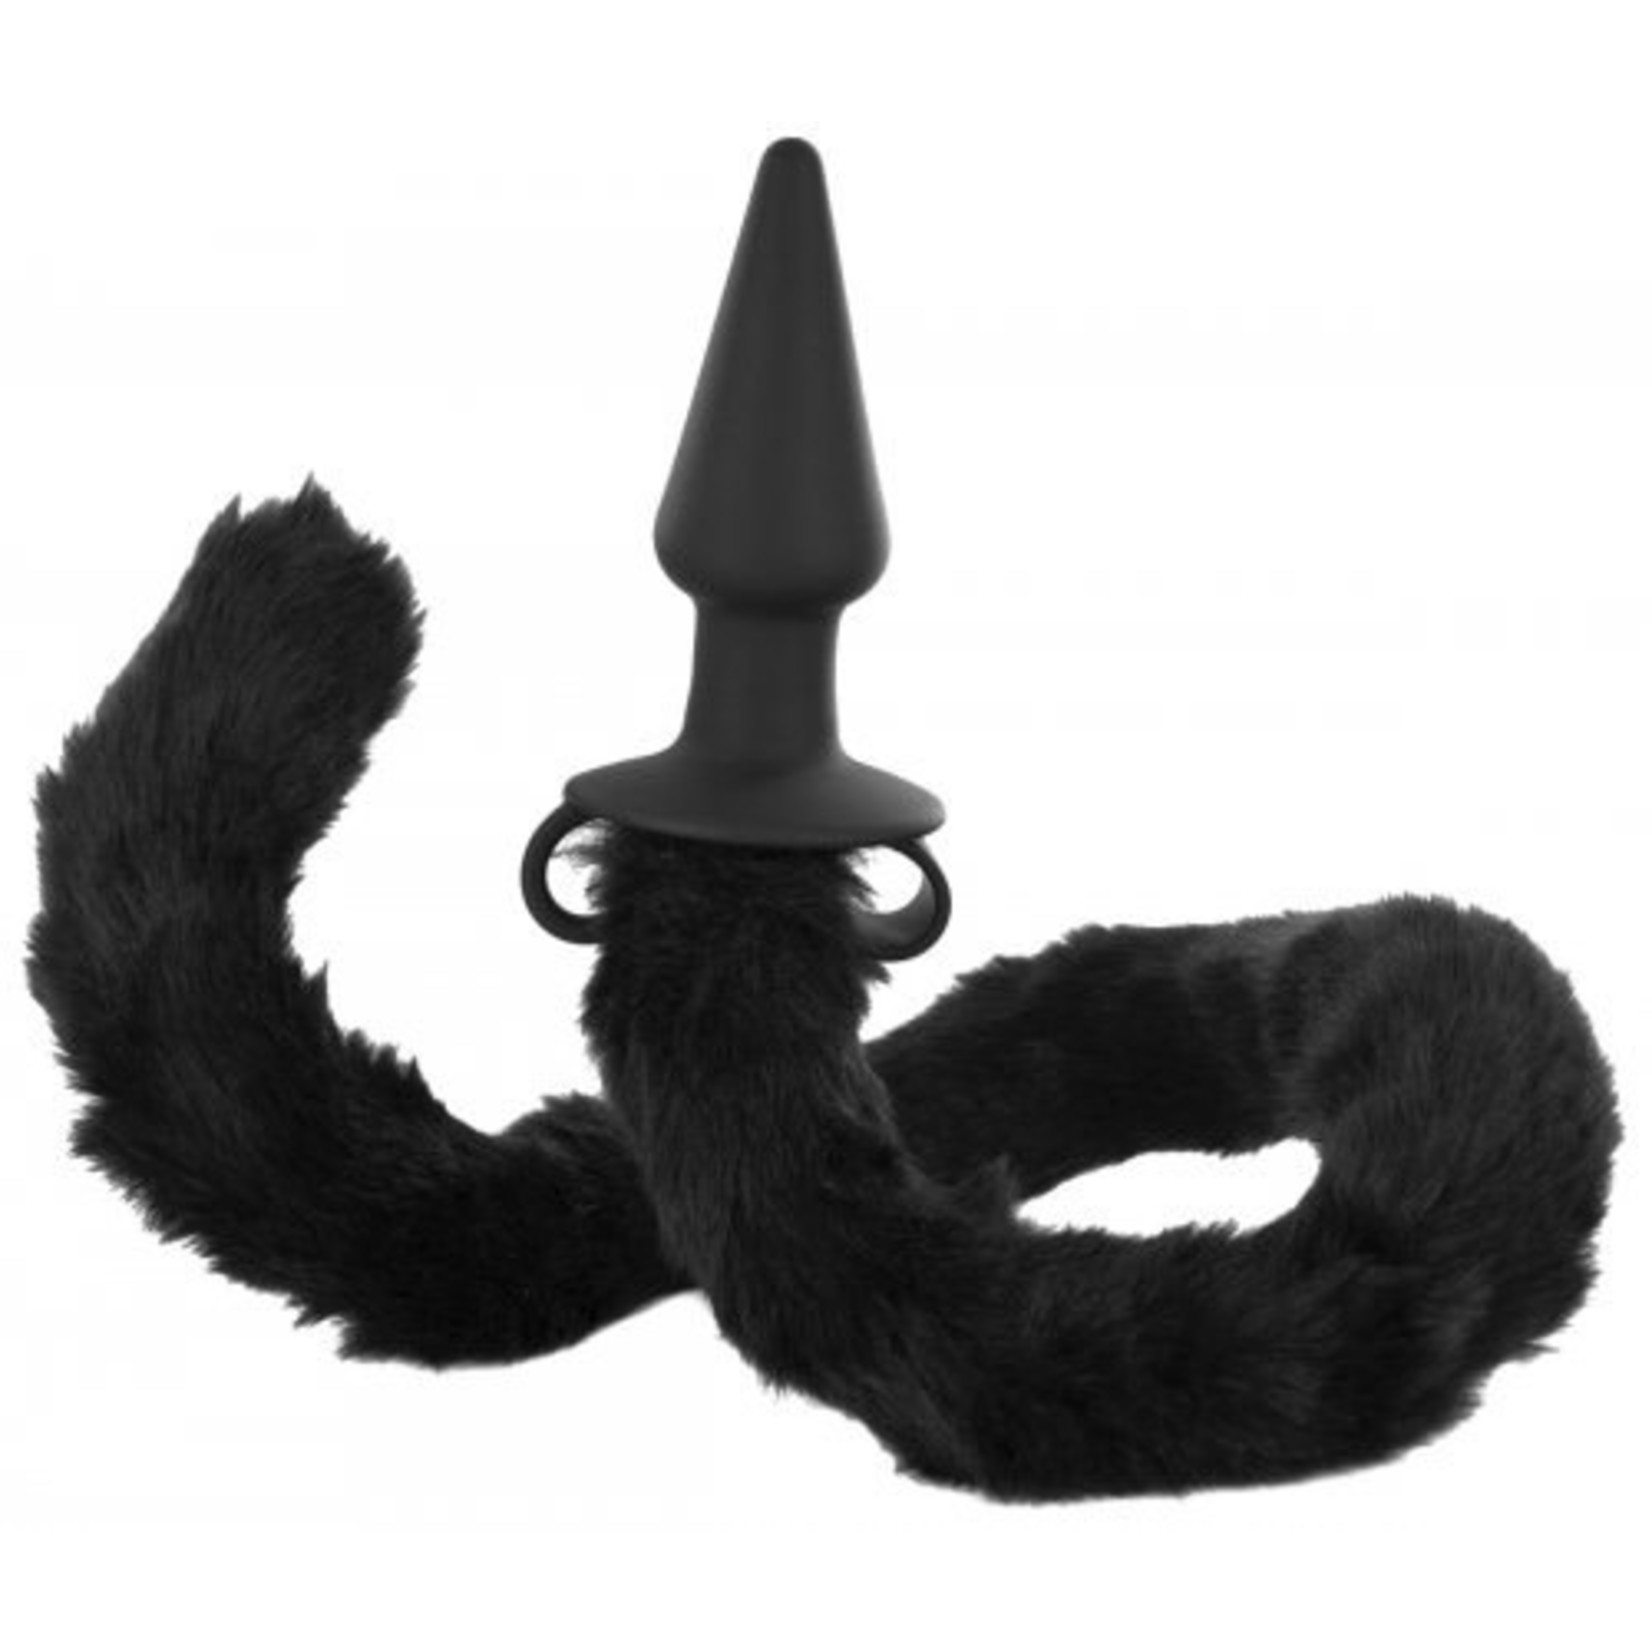 XR BRANDS TAILZ - BAD KITTY SILICONE CAT TAIL ANAL PLUG